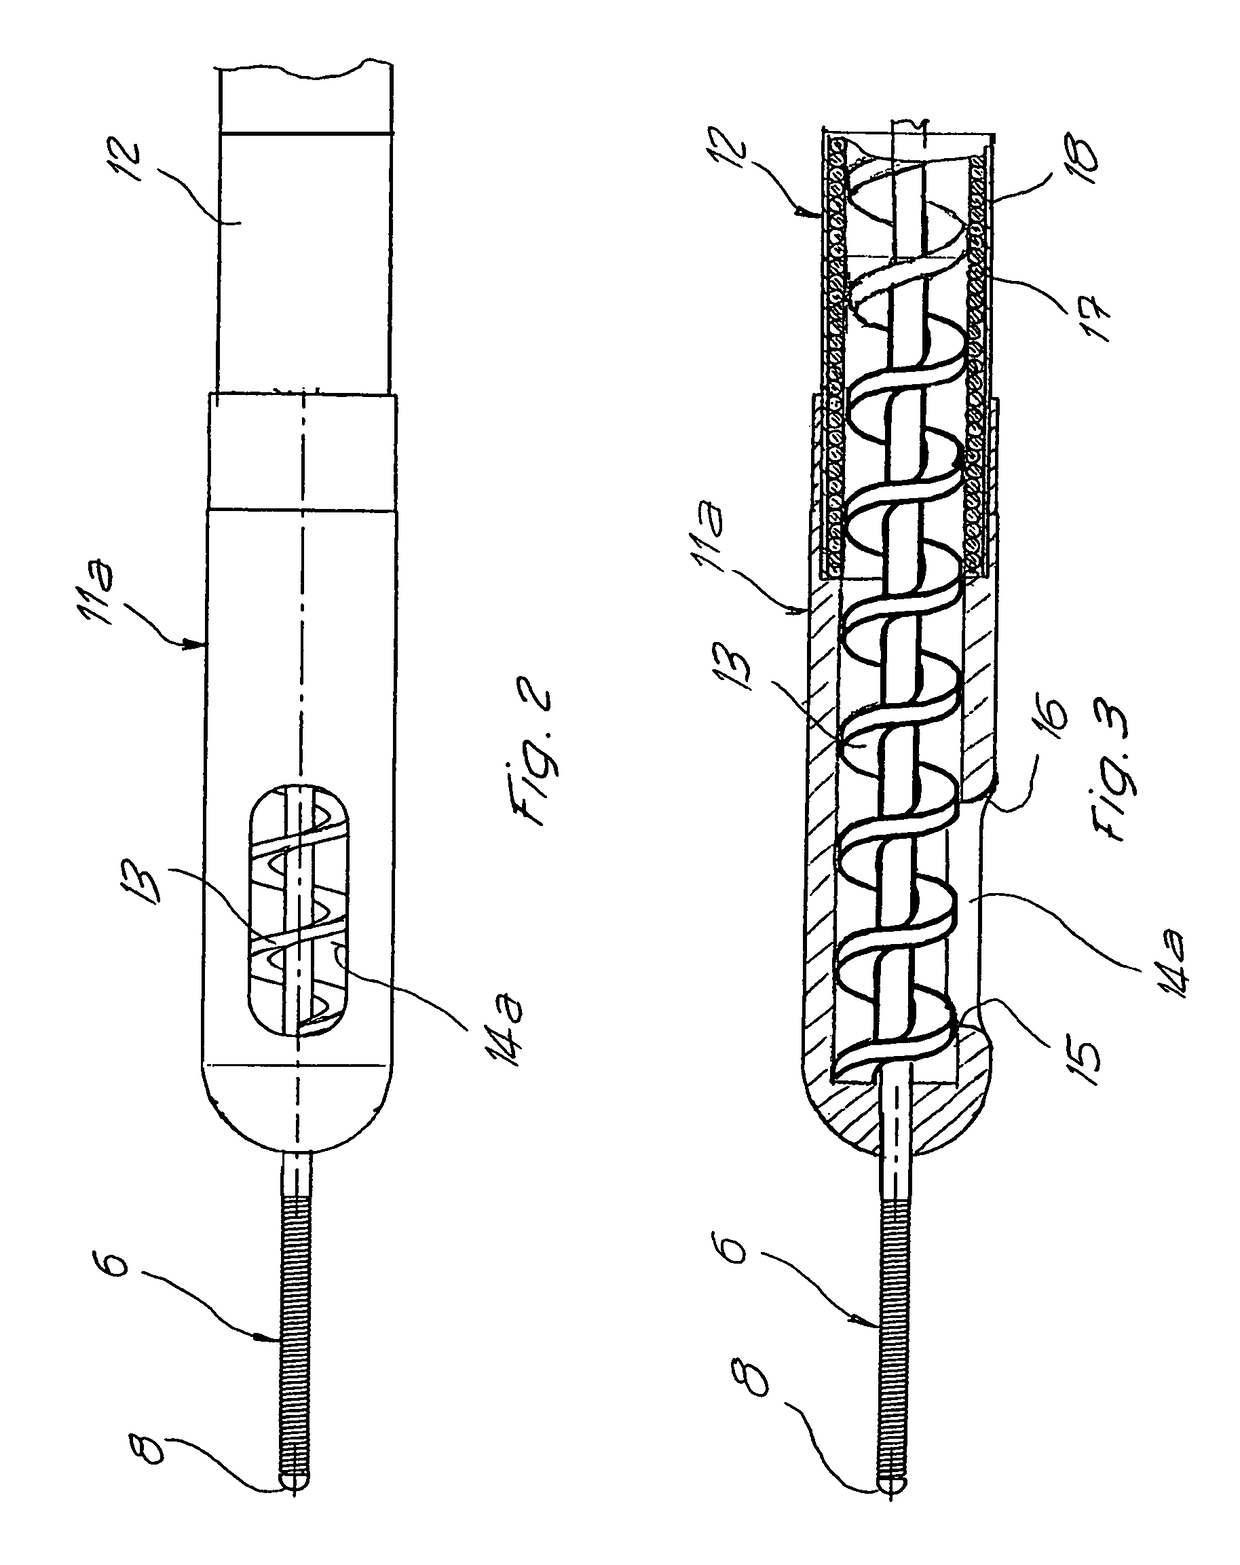 Catheter for aspirating, fragmenting and removing material